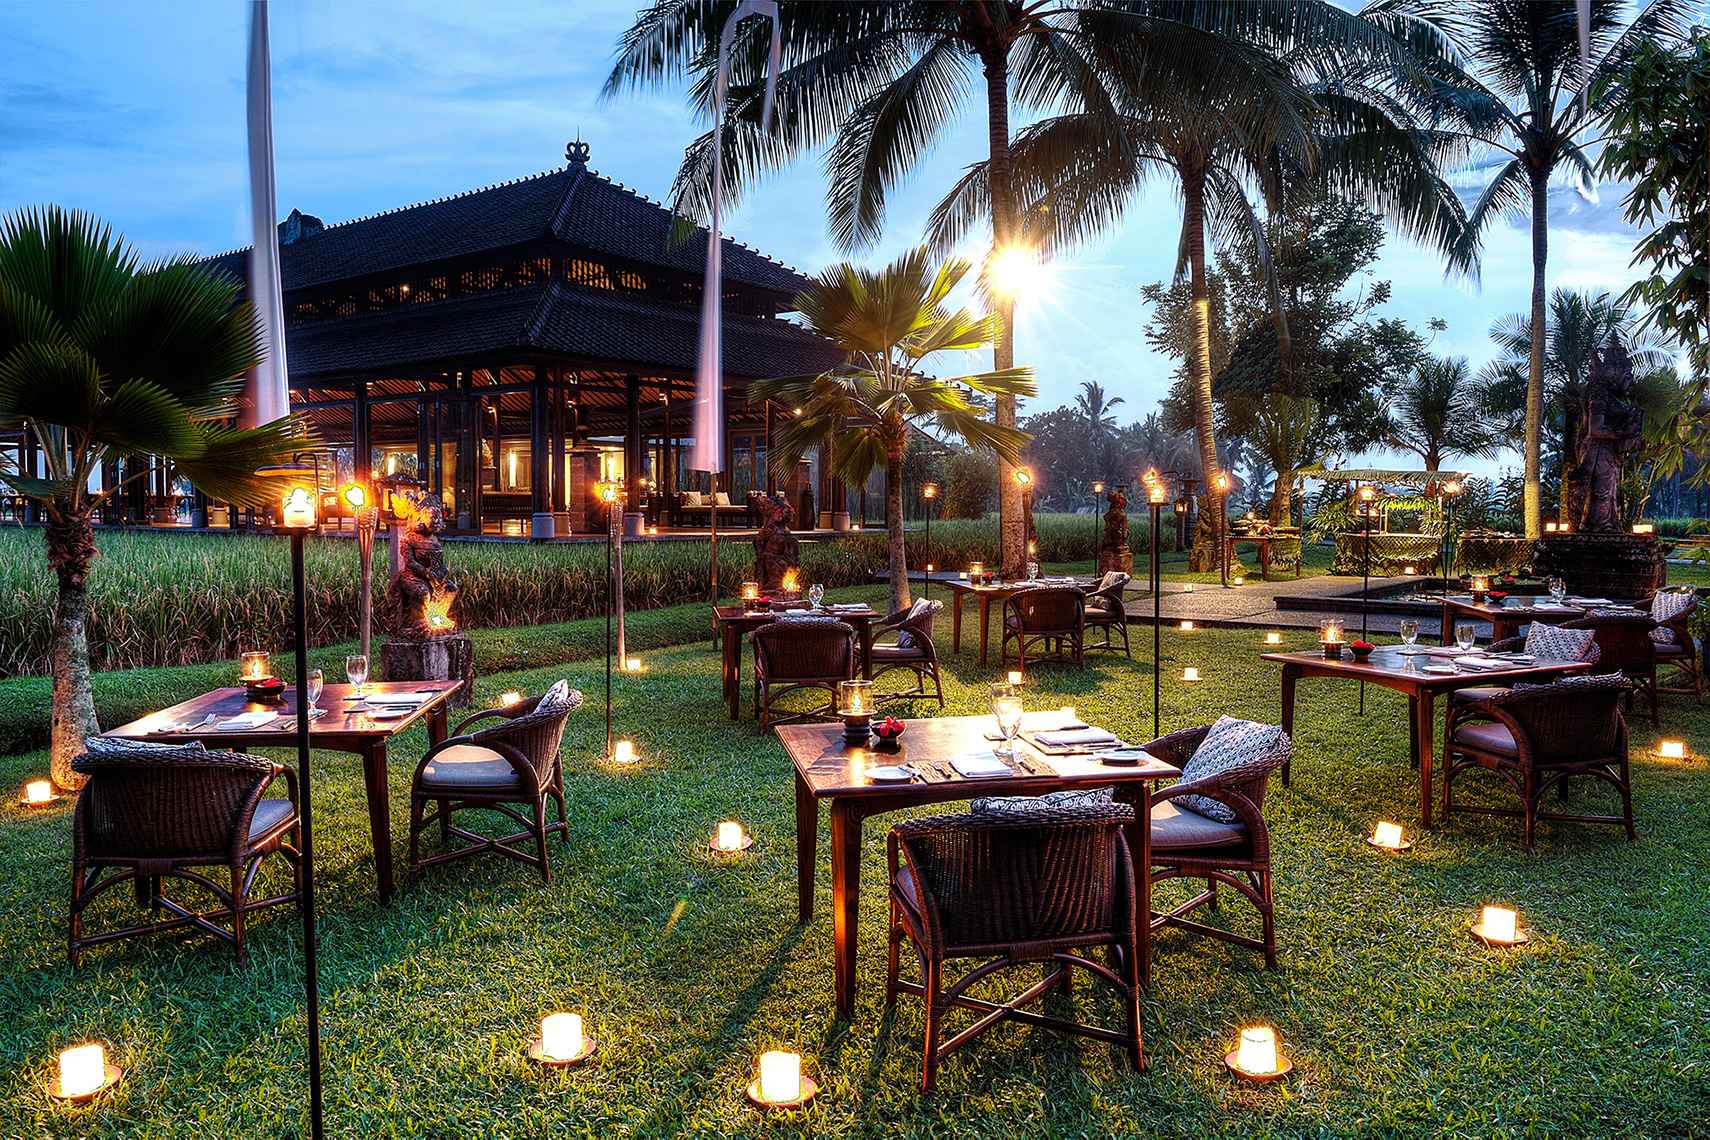 TGU-Dining-Experiences-Barbecue-Under-the-Stars-1